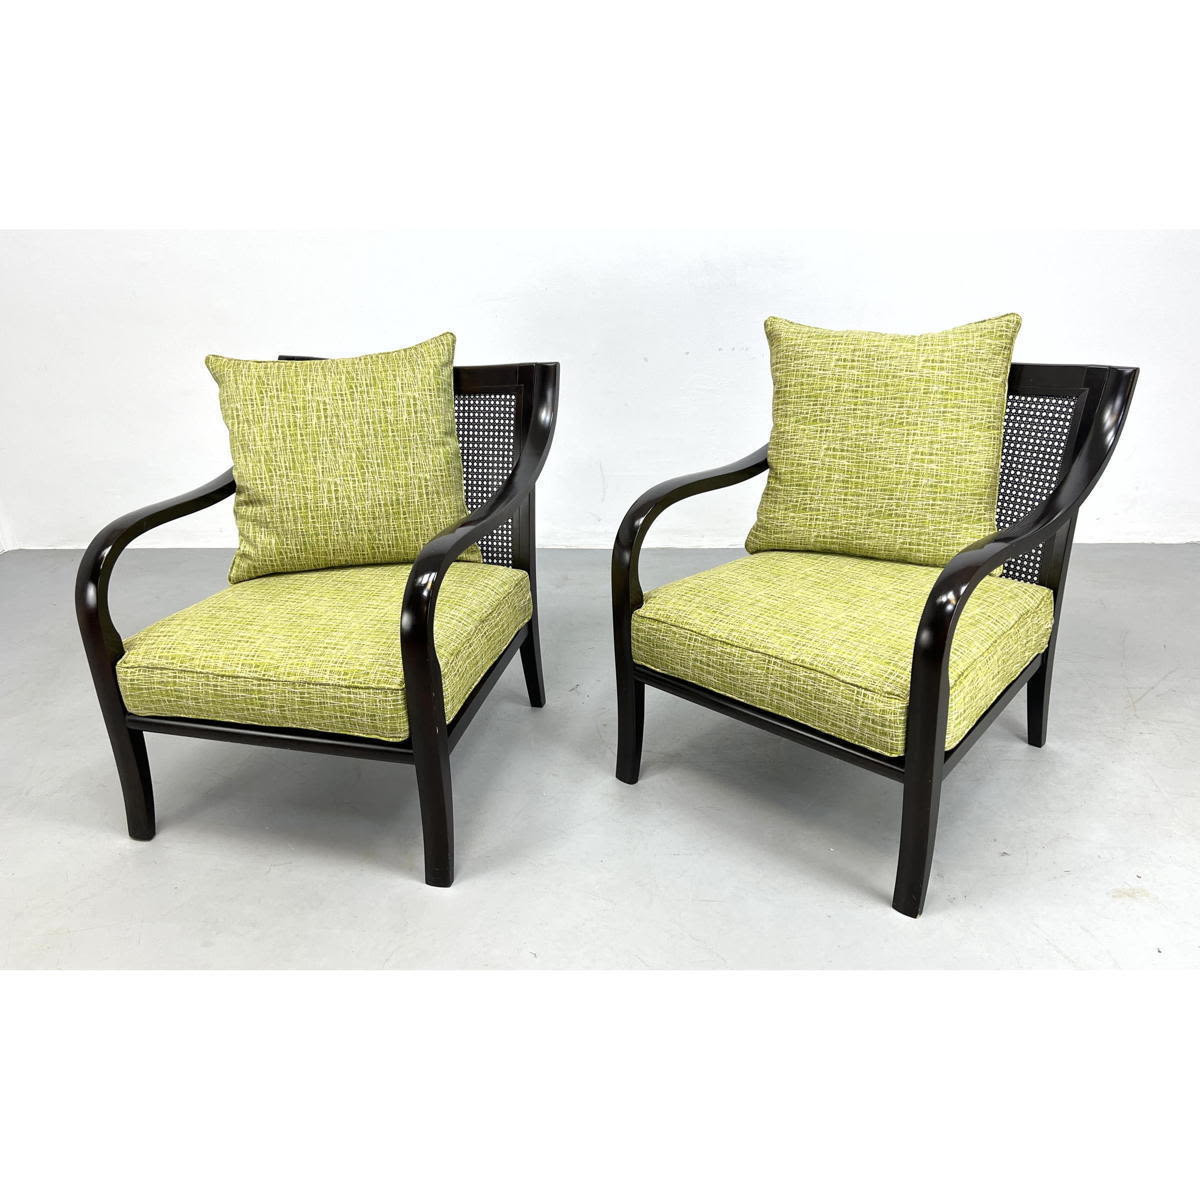 Pair Lounge Chairs with Cane Backs  2baf9c